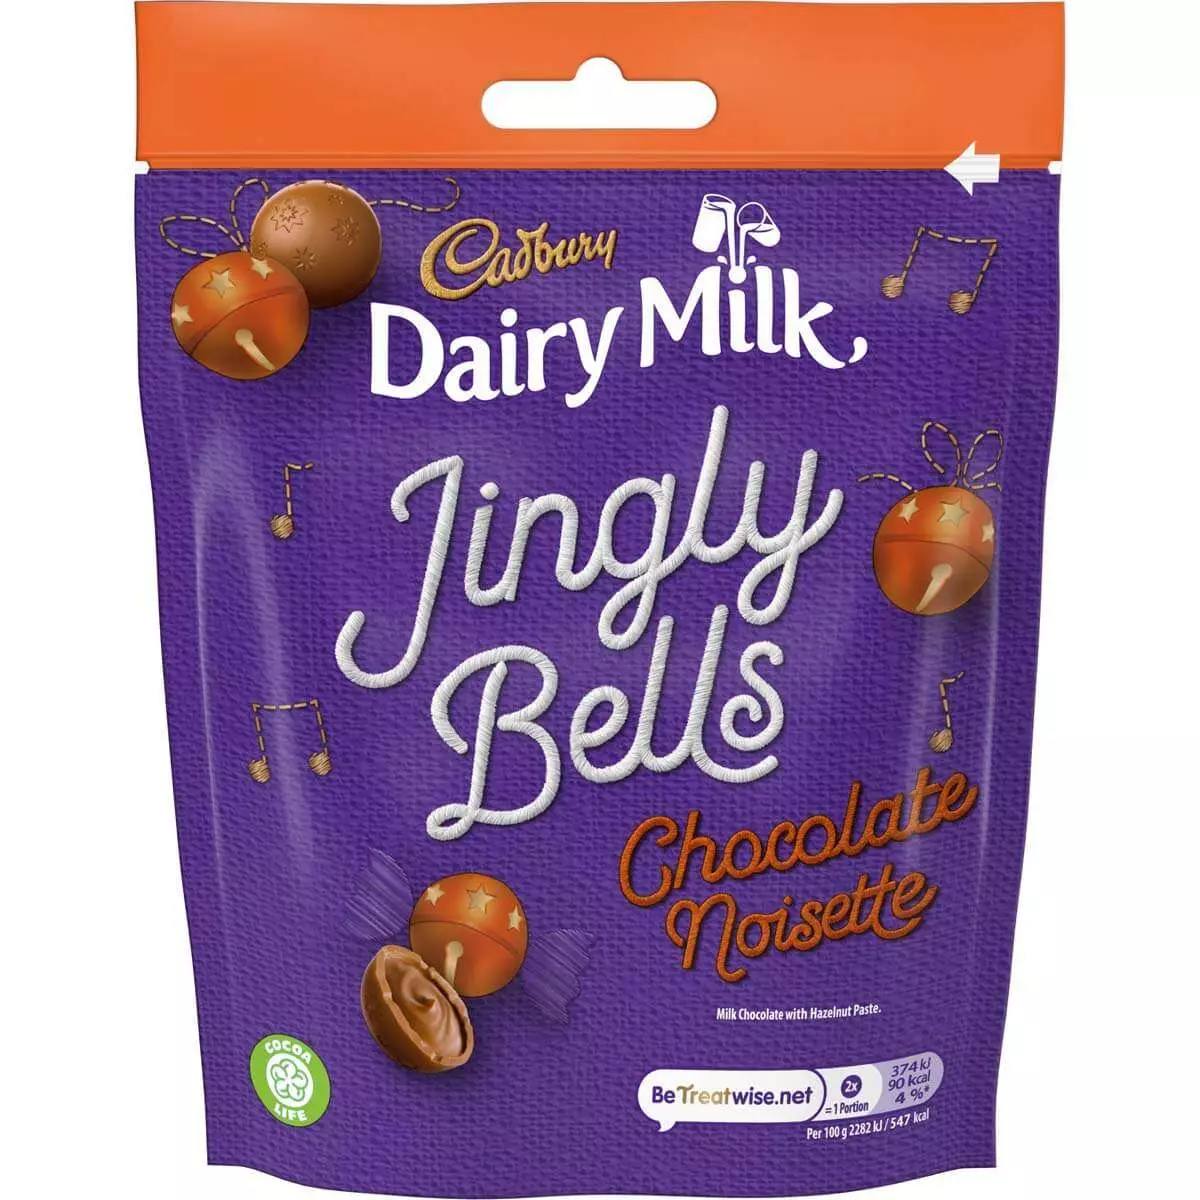 The Jingly Bells are retailing for £1.49 (